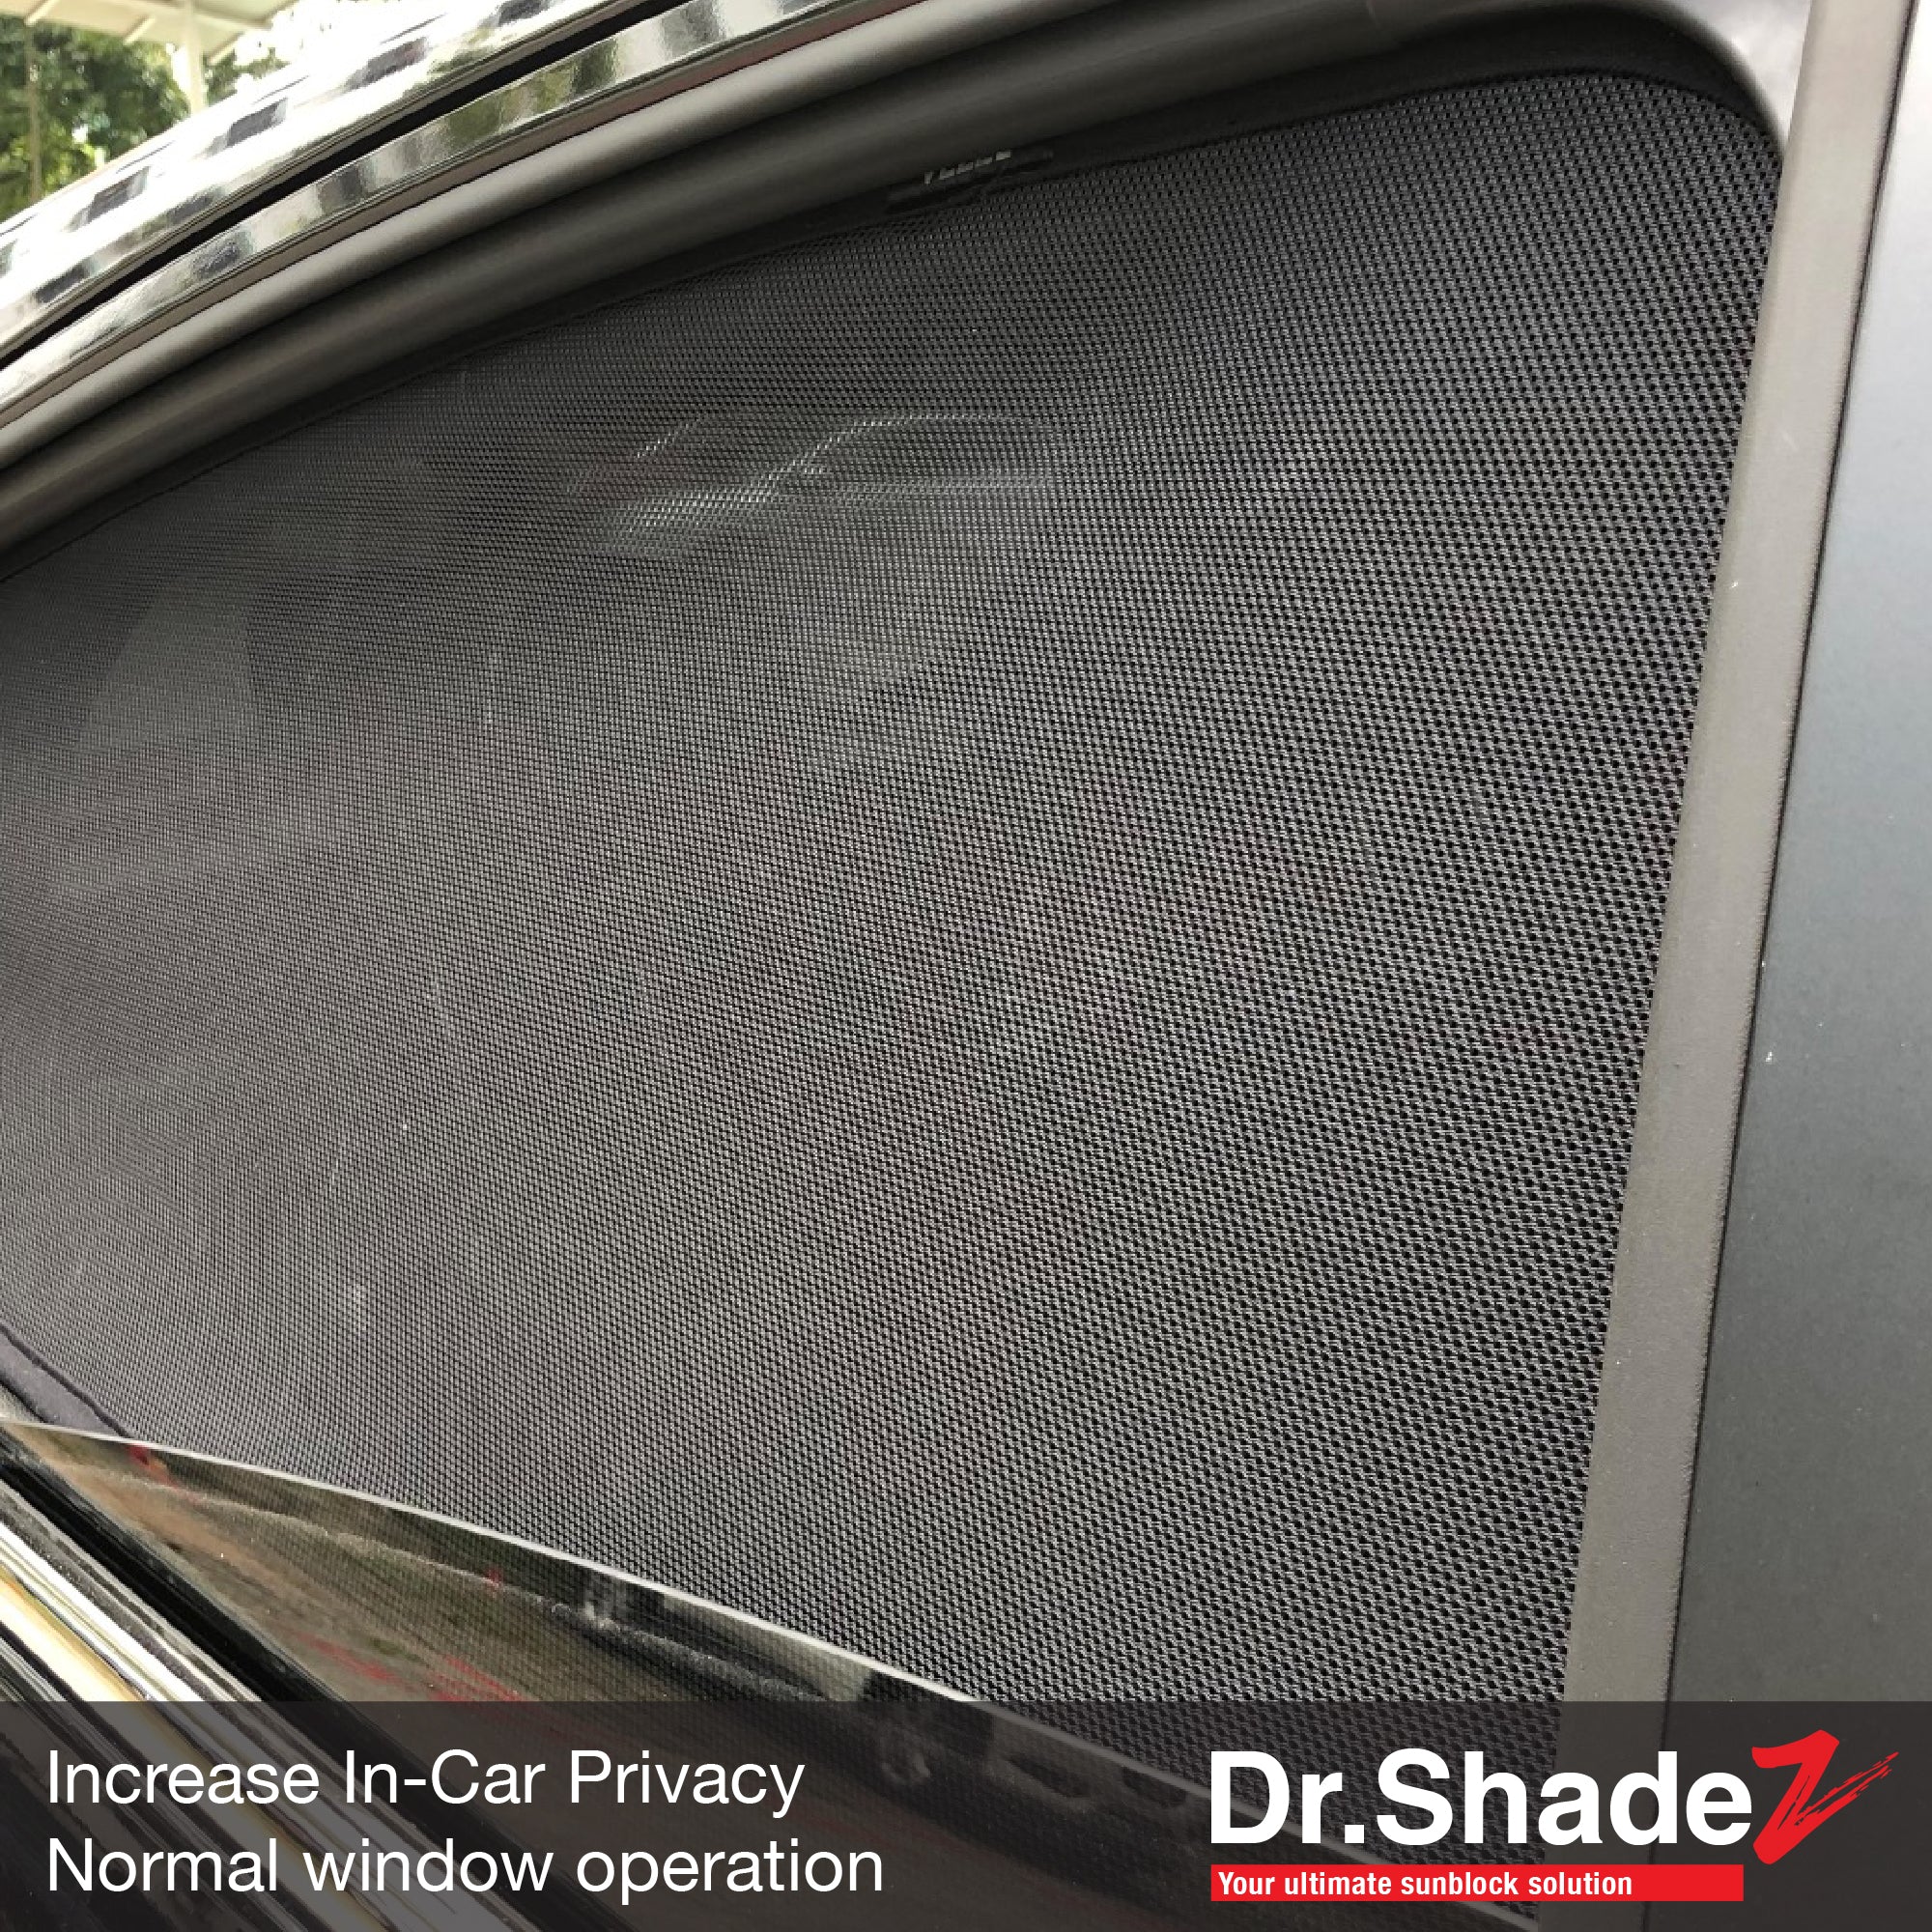 Mercedes Benz A Class Hatchback 2013-2018 3rd Generation (W176) Germany Hatchback Customised Car Window Magnetic Sunshades